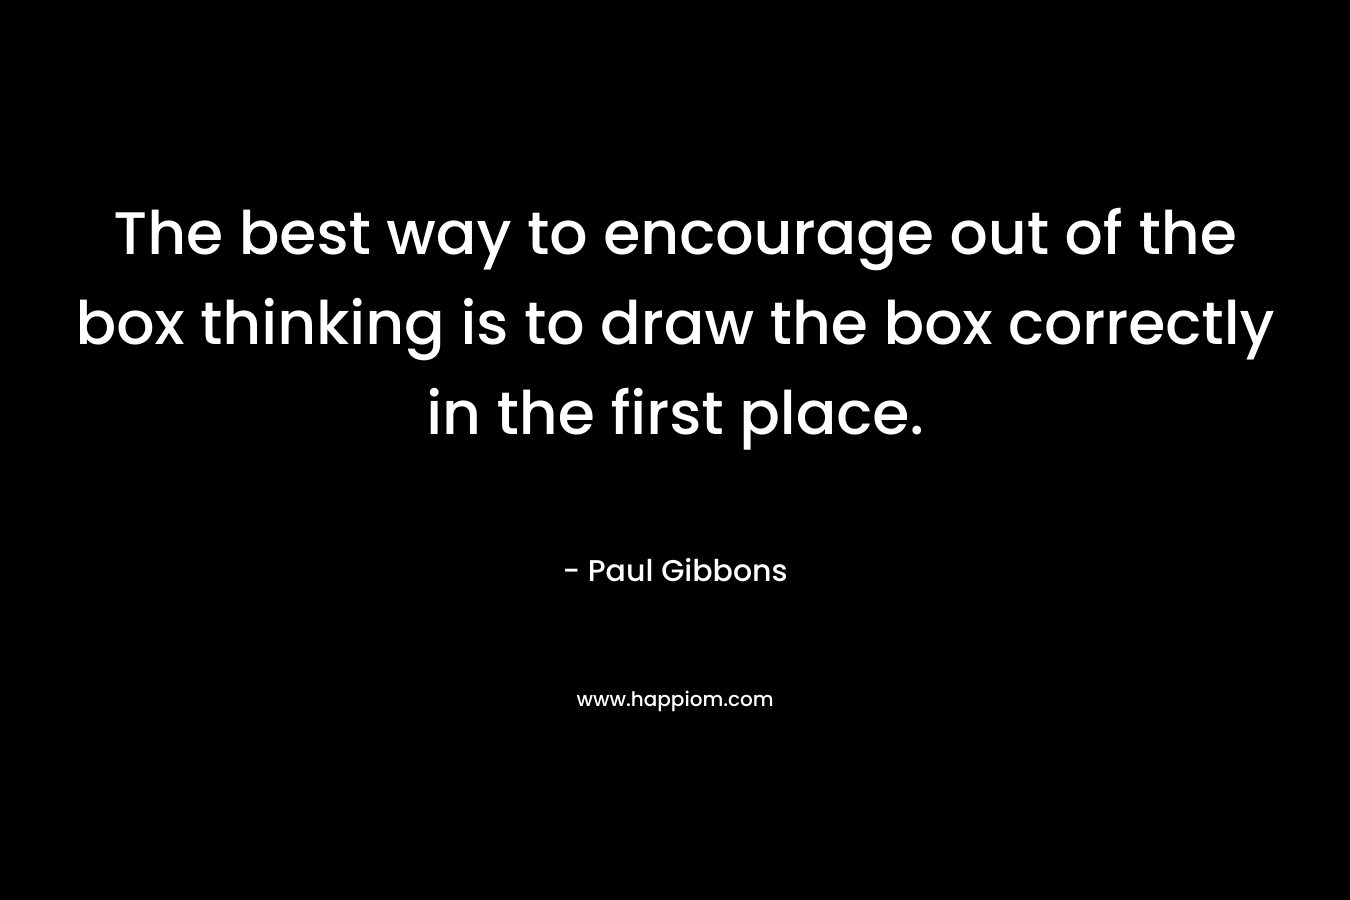 The best way to encourage out of the box thinking is to draw the box correctly in the first place.